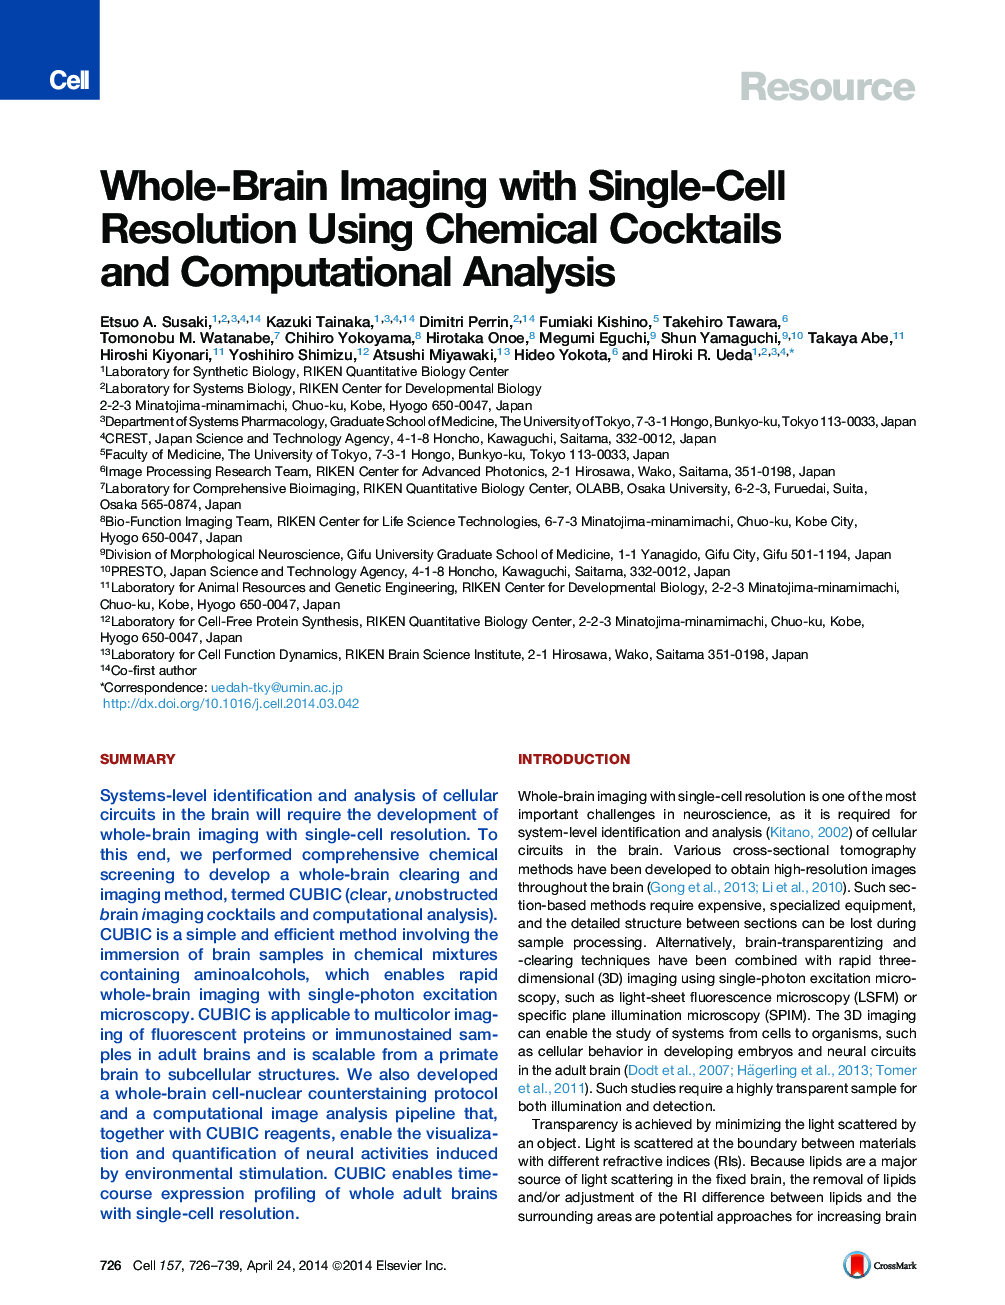 Whole-Brain Imaging with Single-Cell Resolution Using Chemical Cocktails and Computational Analysis